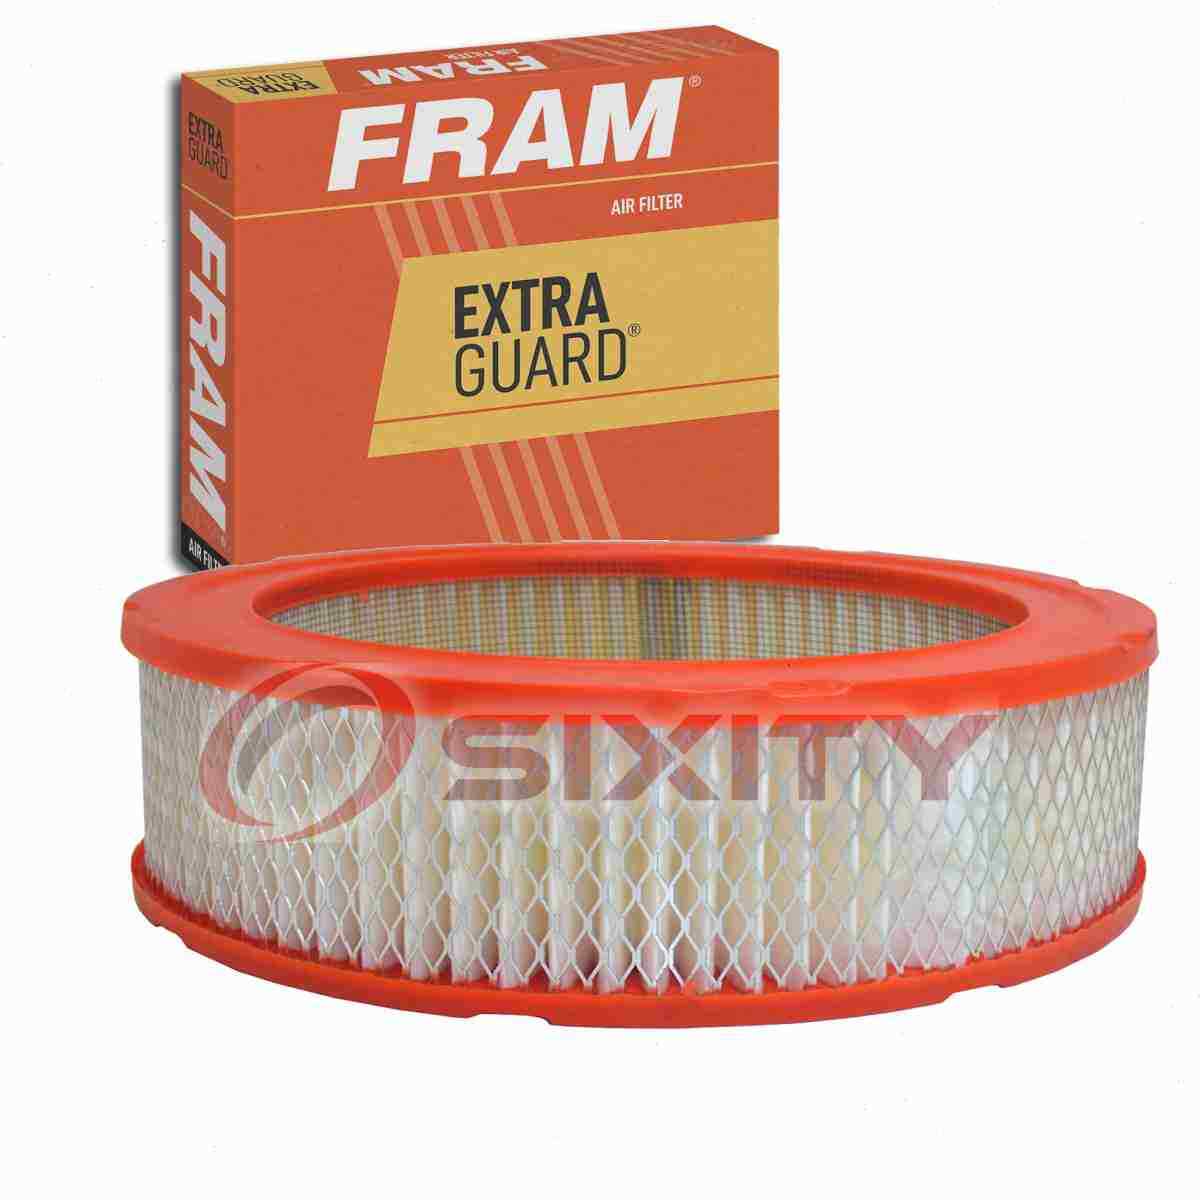 FRAM Extra Guard Air Filter for 1959-1978 Plymouth Fury Intake Inlet wp